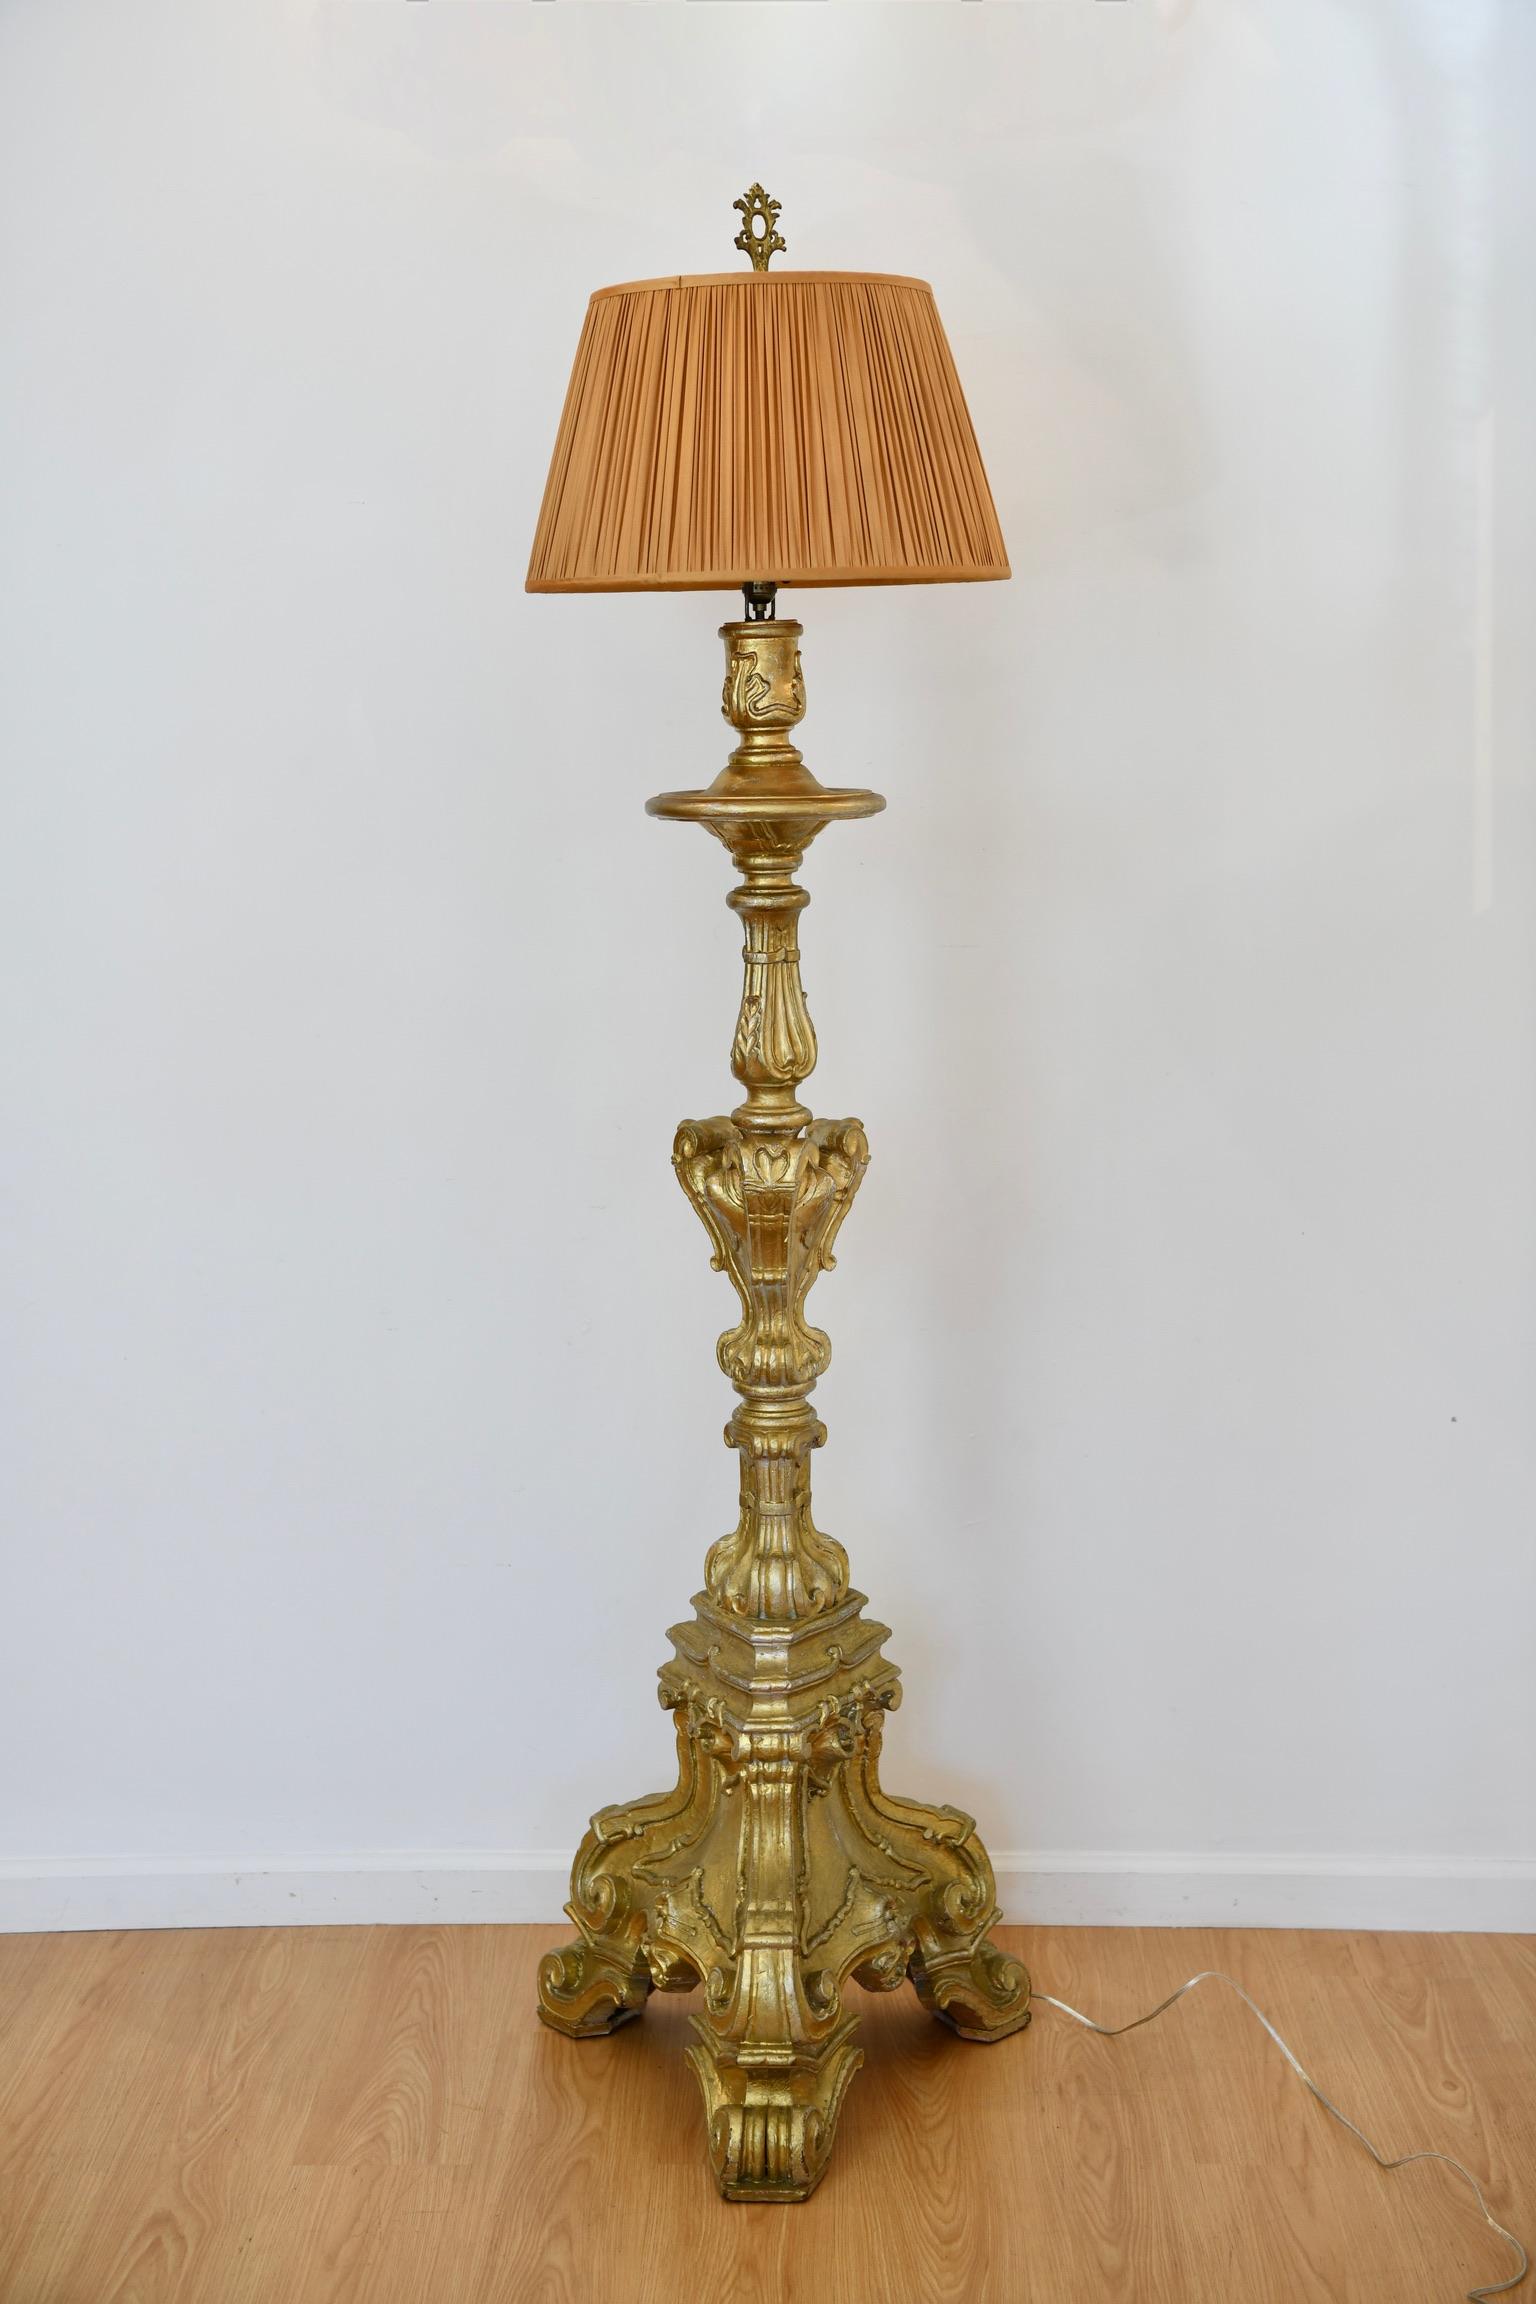 Italian baroque-style carved giltwood floor lamp converted from a pricket candlestick with scrolling and foliate details. Dimensions: 77.5